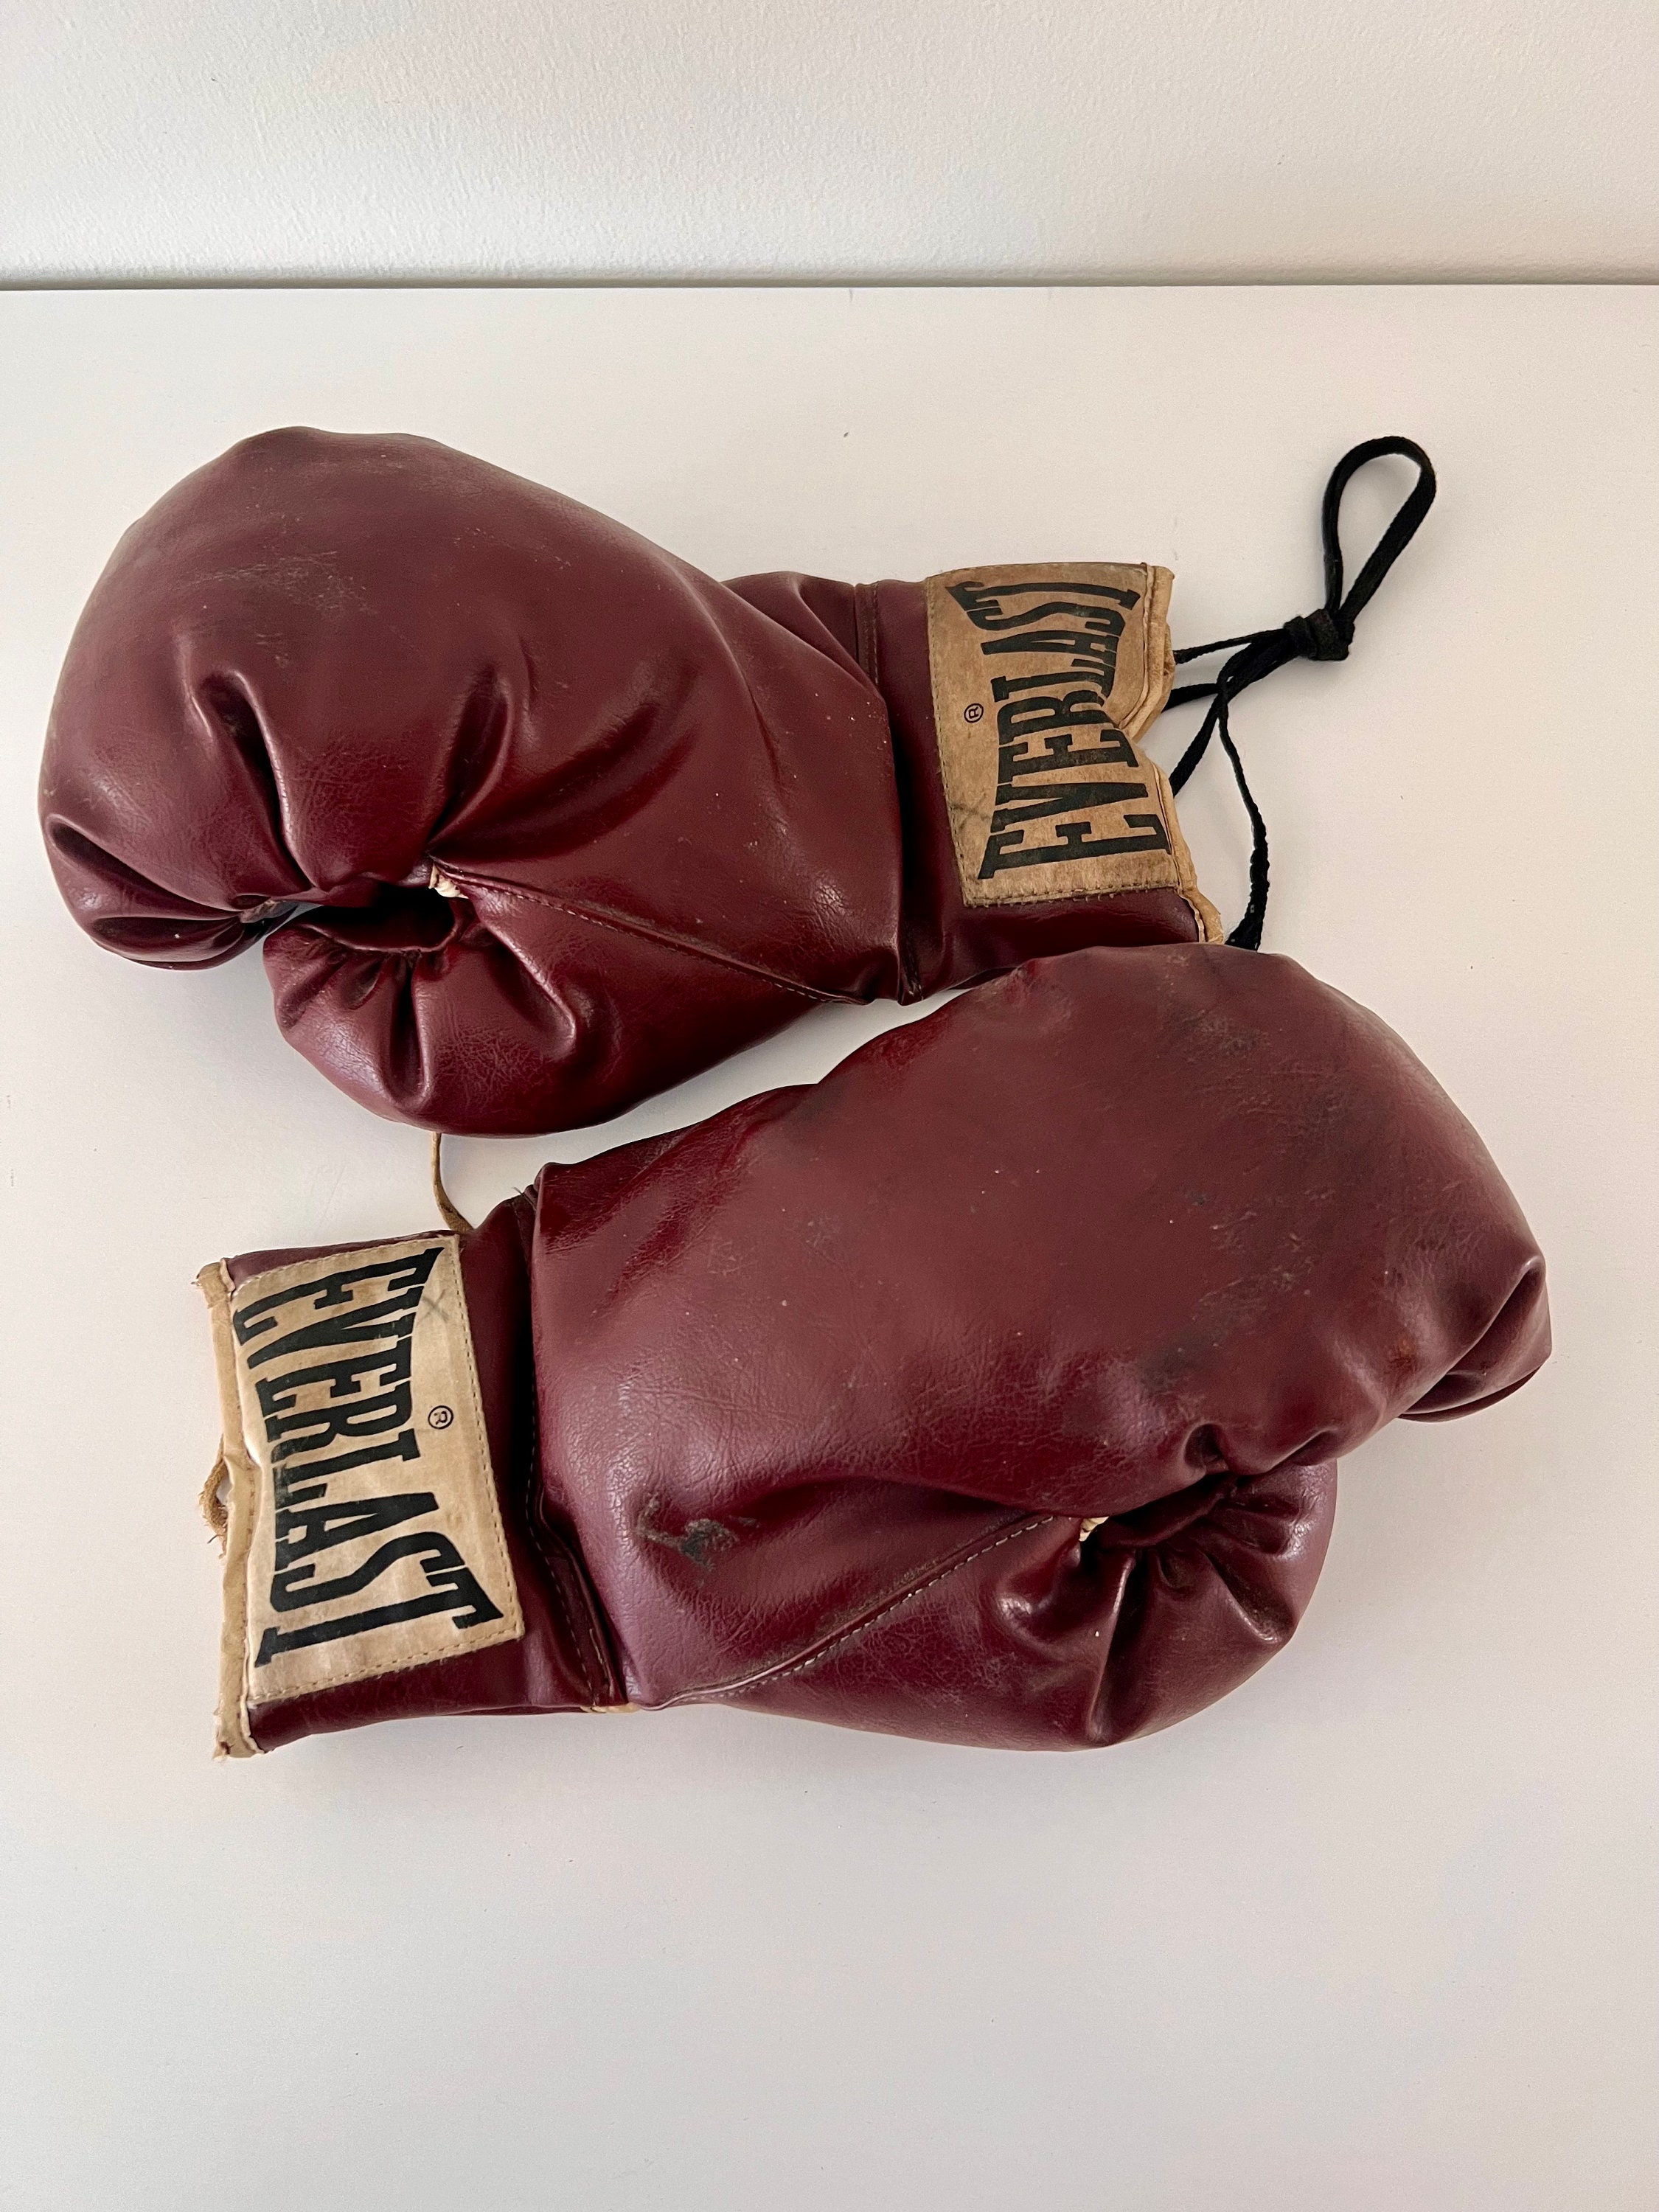 Vintage EVERLAST BOXING GLOVES Leather Distressed Boxing - Etsy 日本